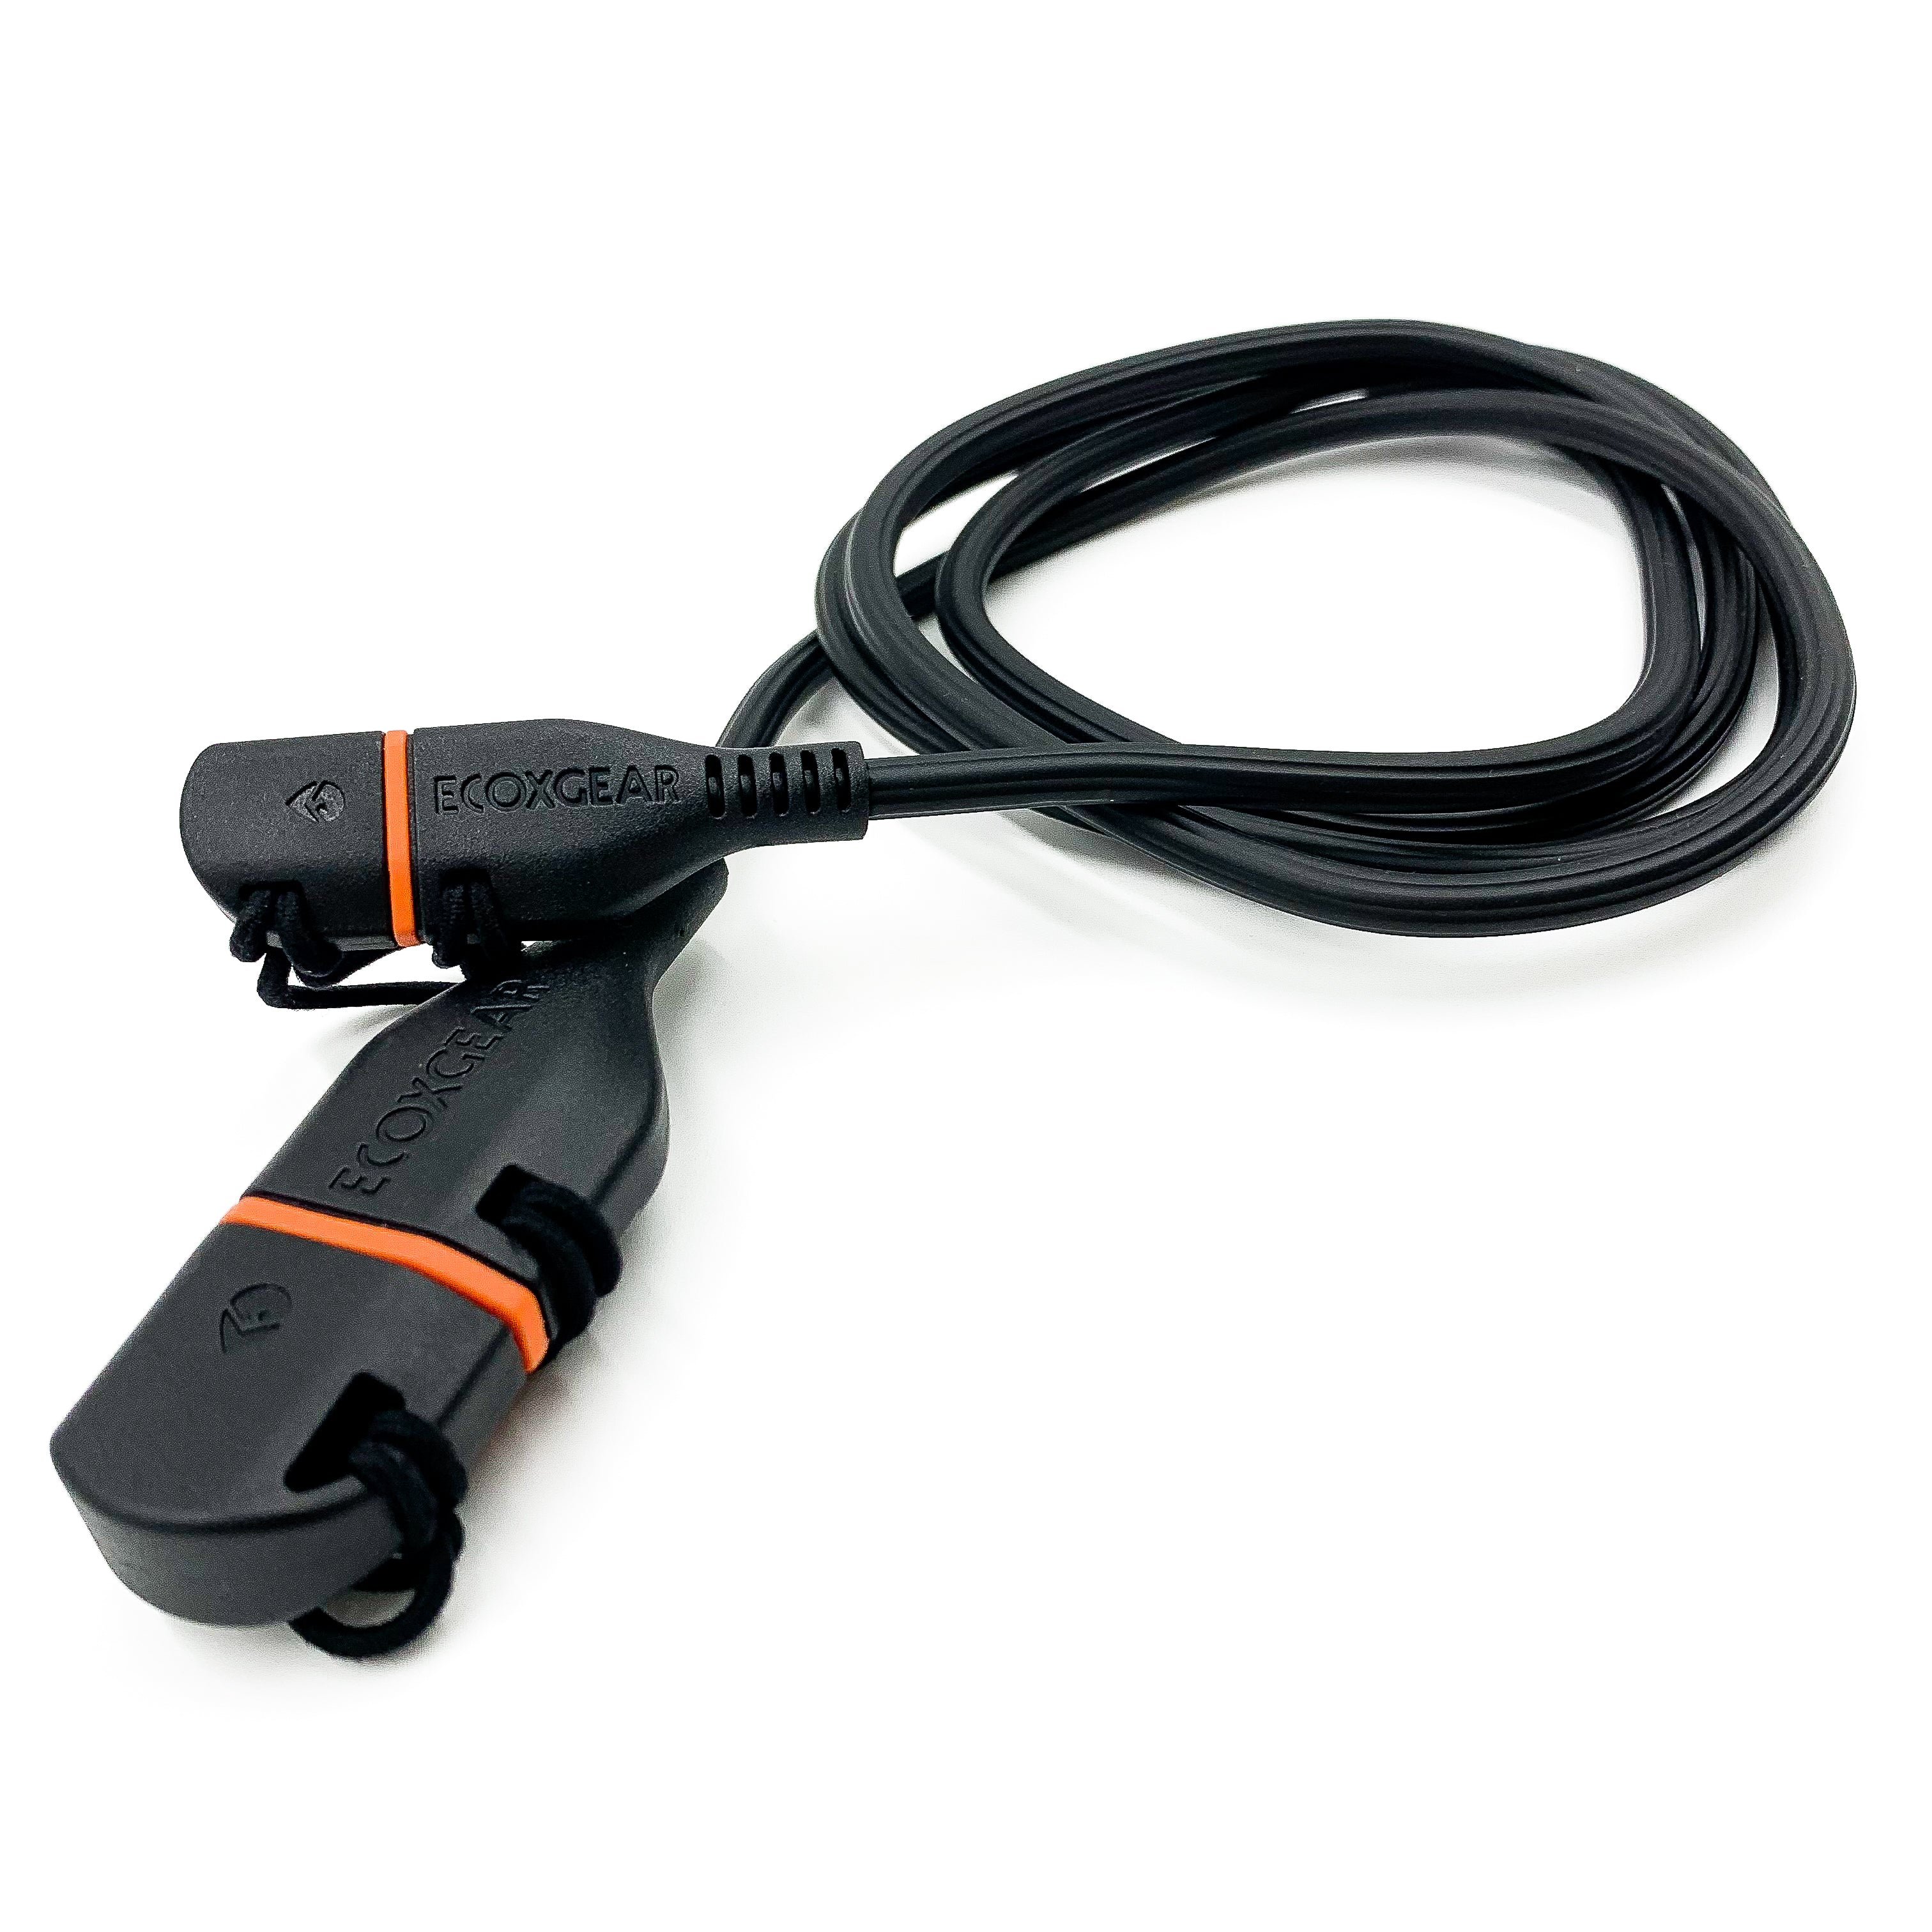 JBL Xtreme 2 Charger Cord and Cable - JBL Singapore